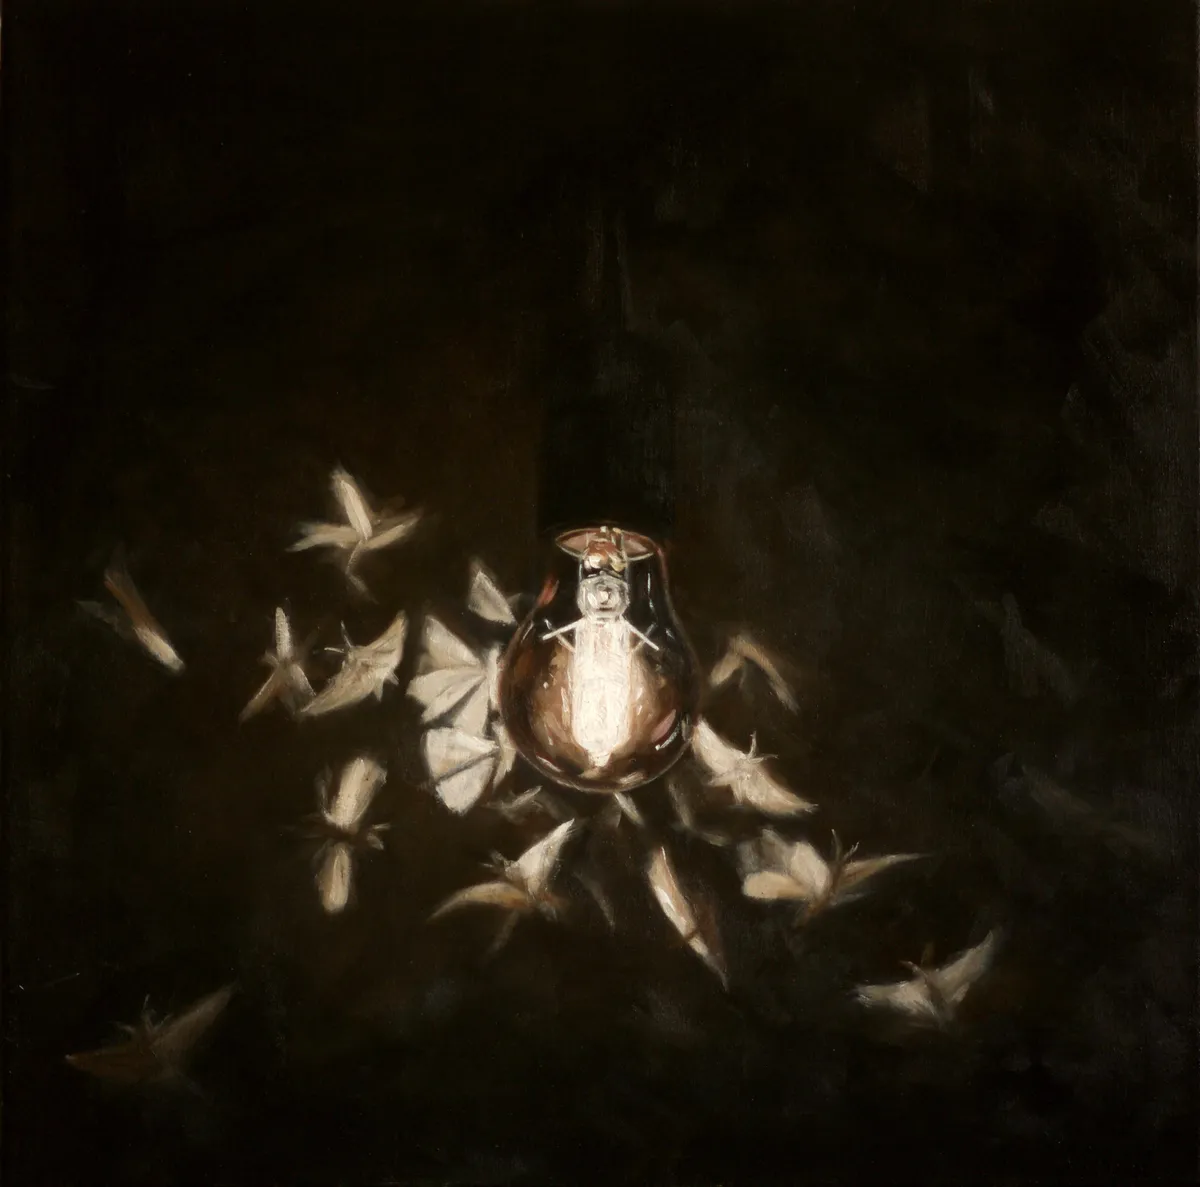 One of the finalists. Moths - 'Following the Light' by Alex Ashton